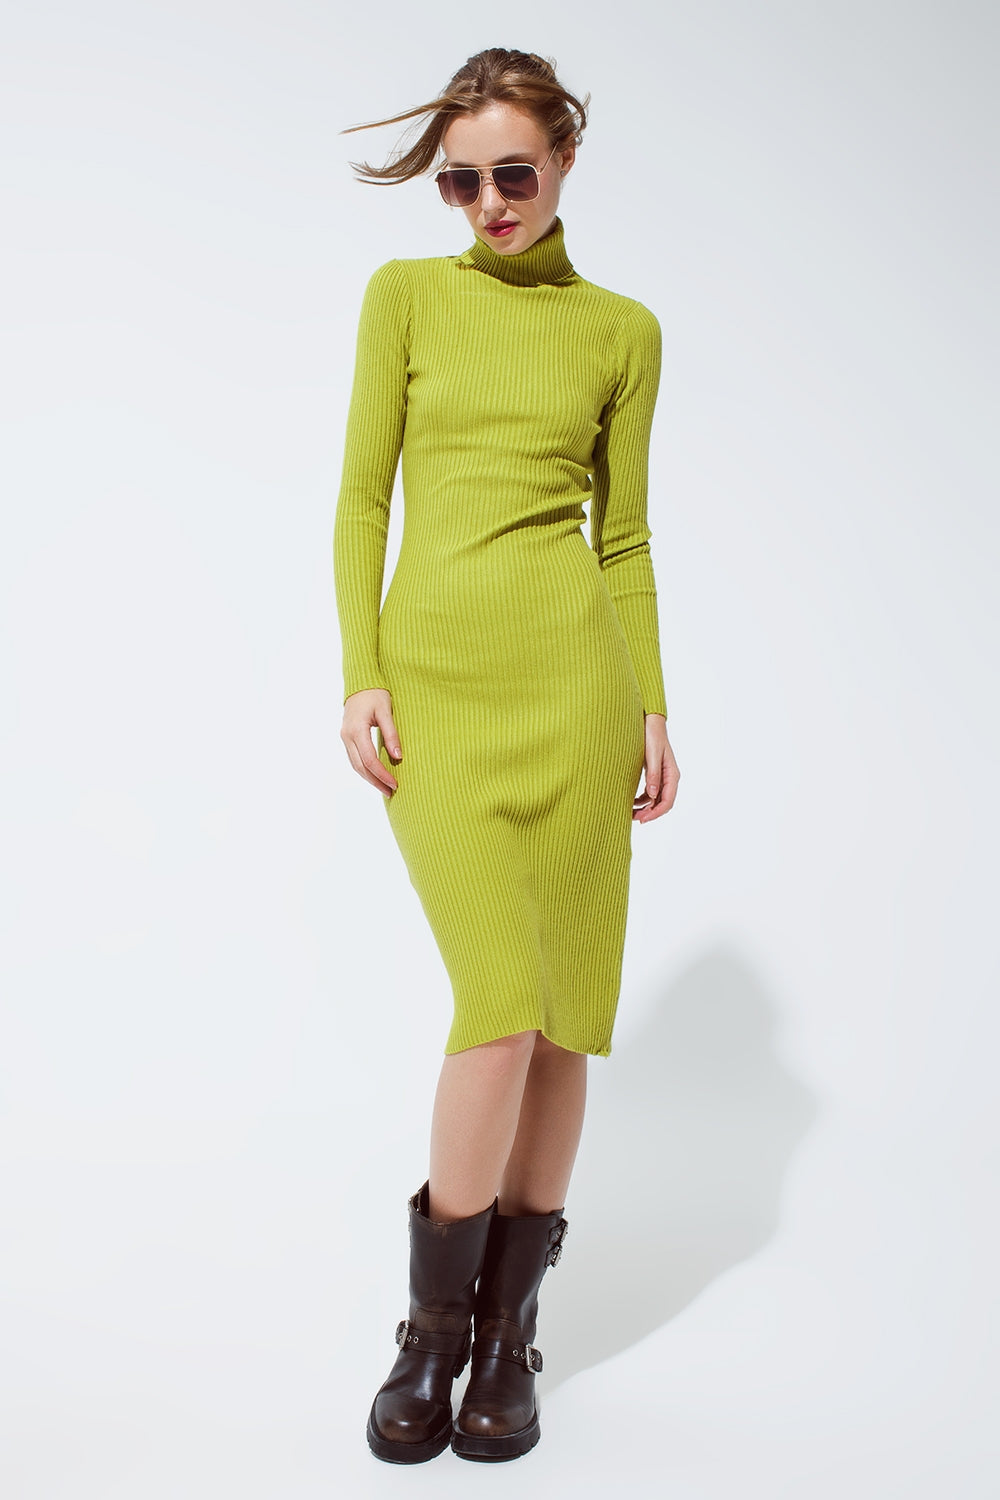 Q2 MIDI dress in green with turtle neck